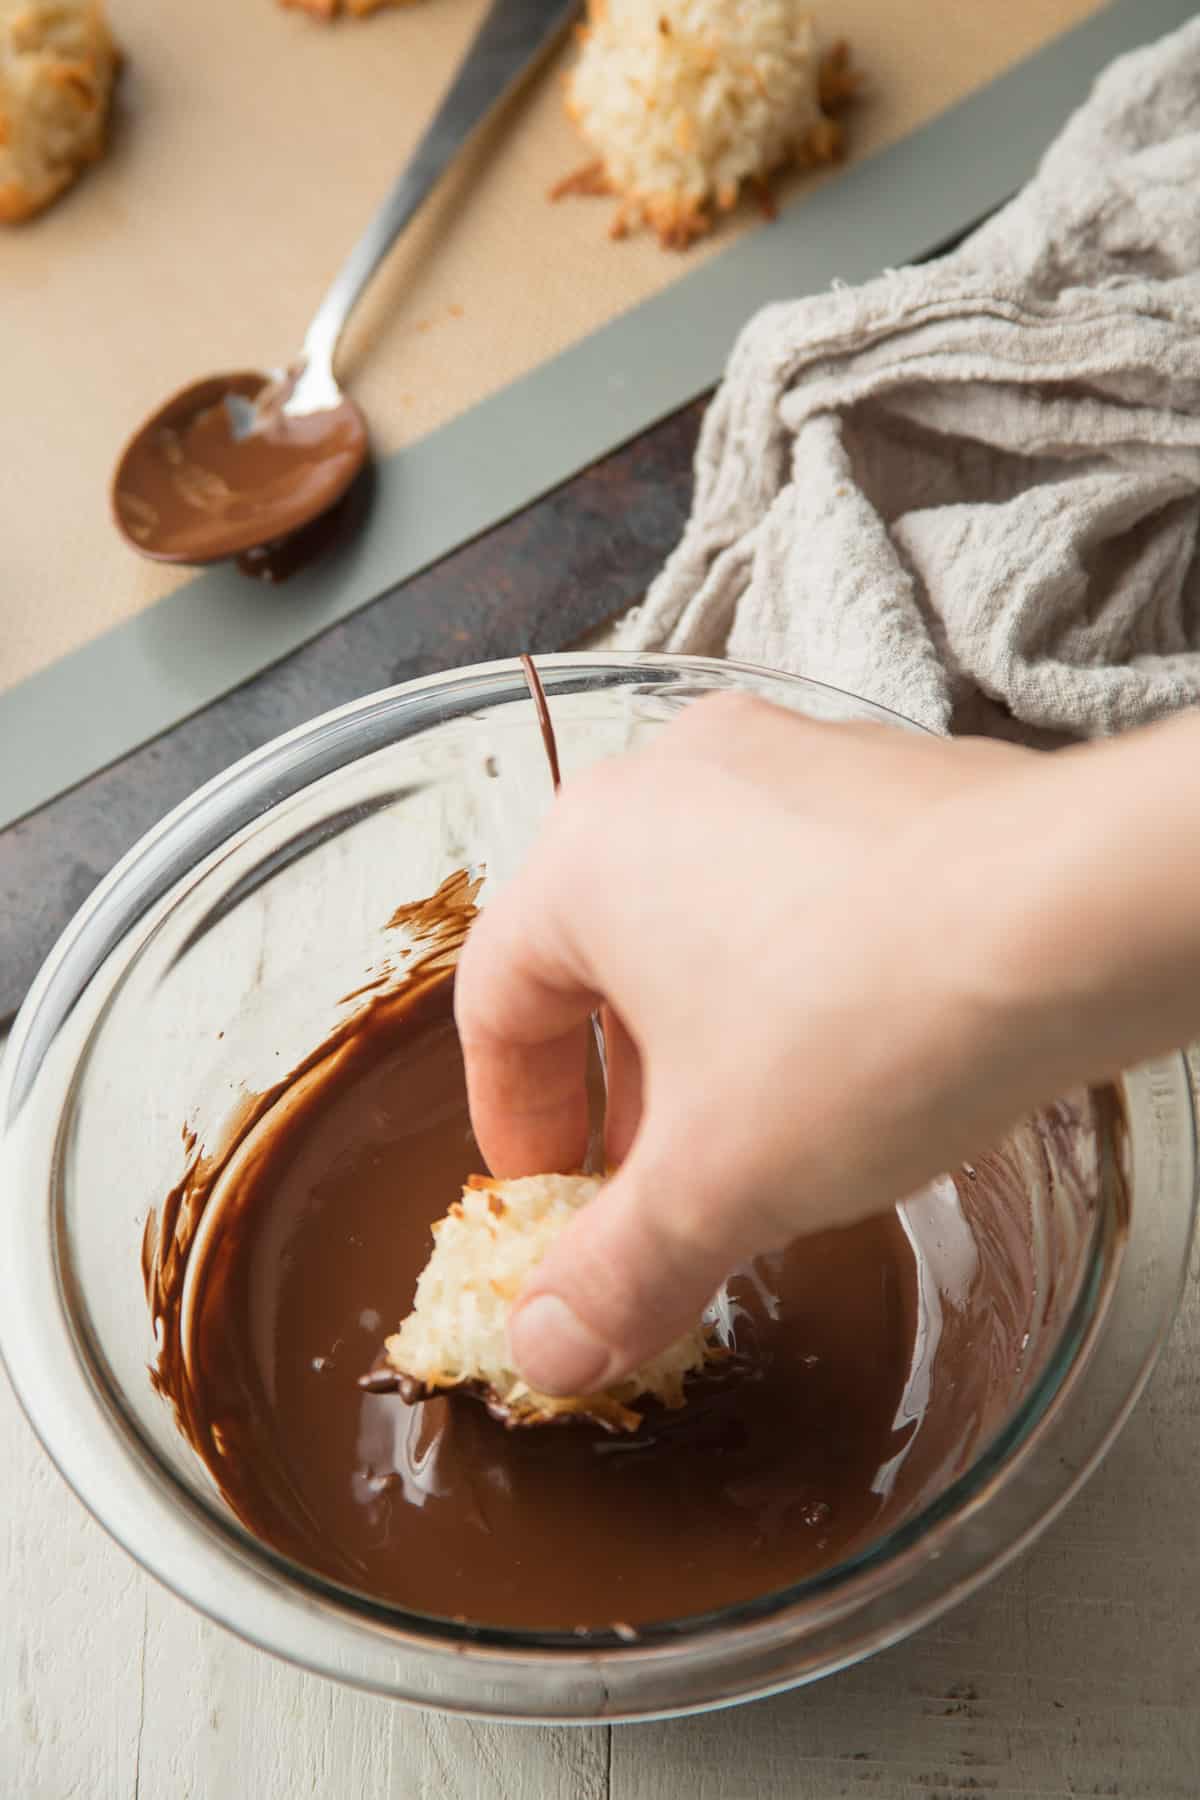 Hand dipping a Vegan Coconut Macaroon in chocolate.